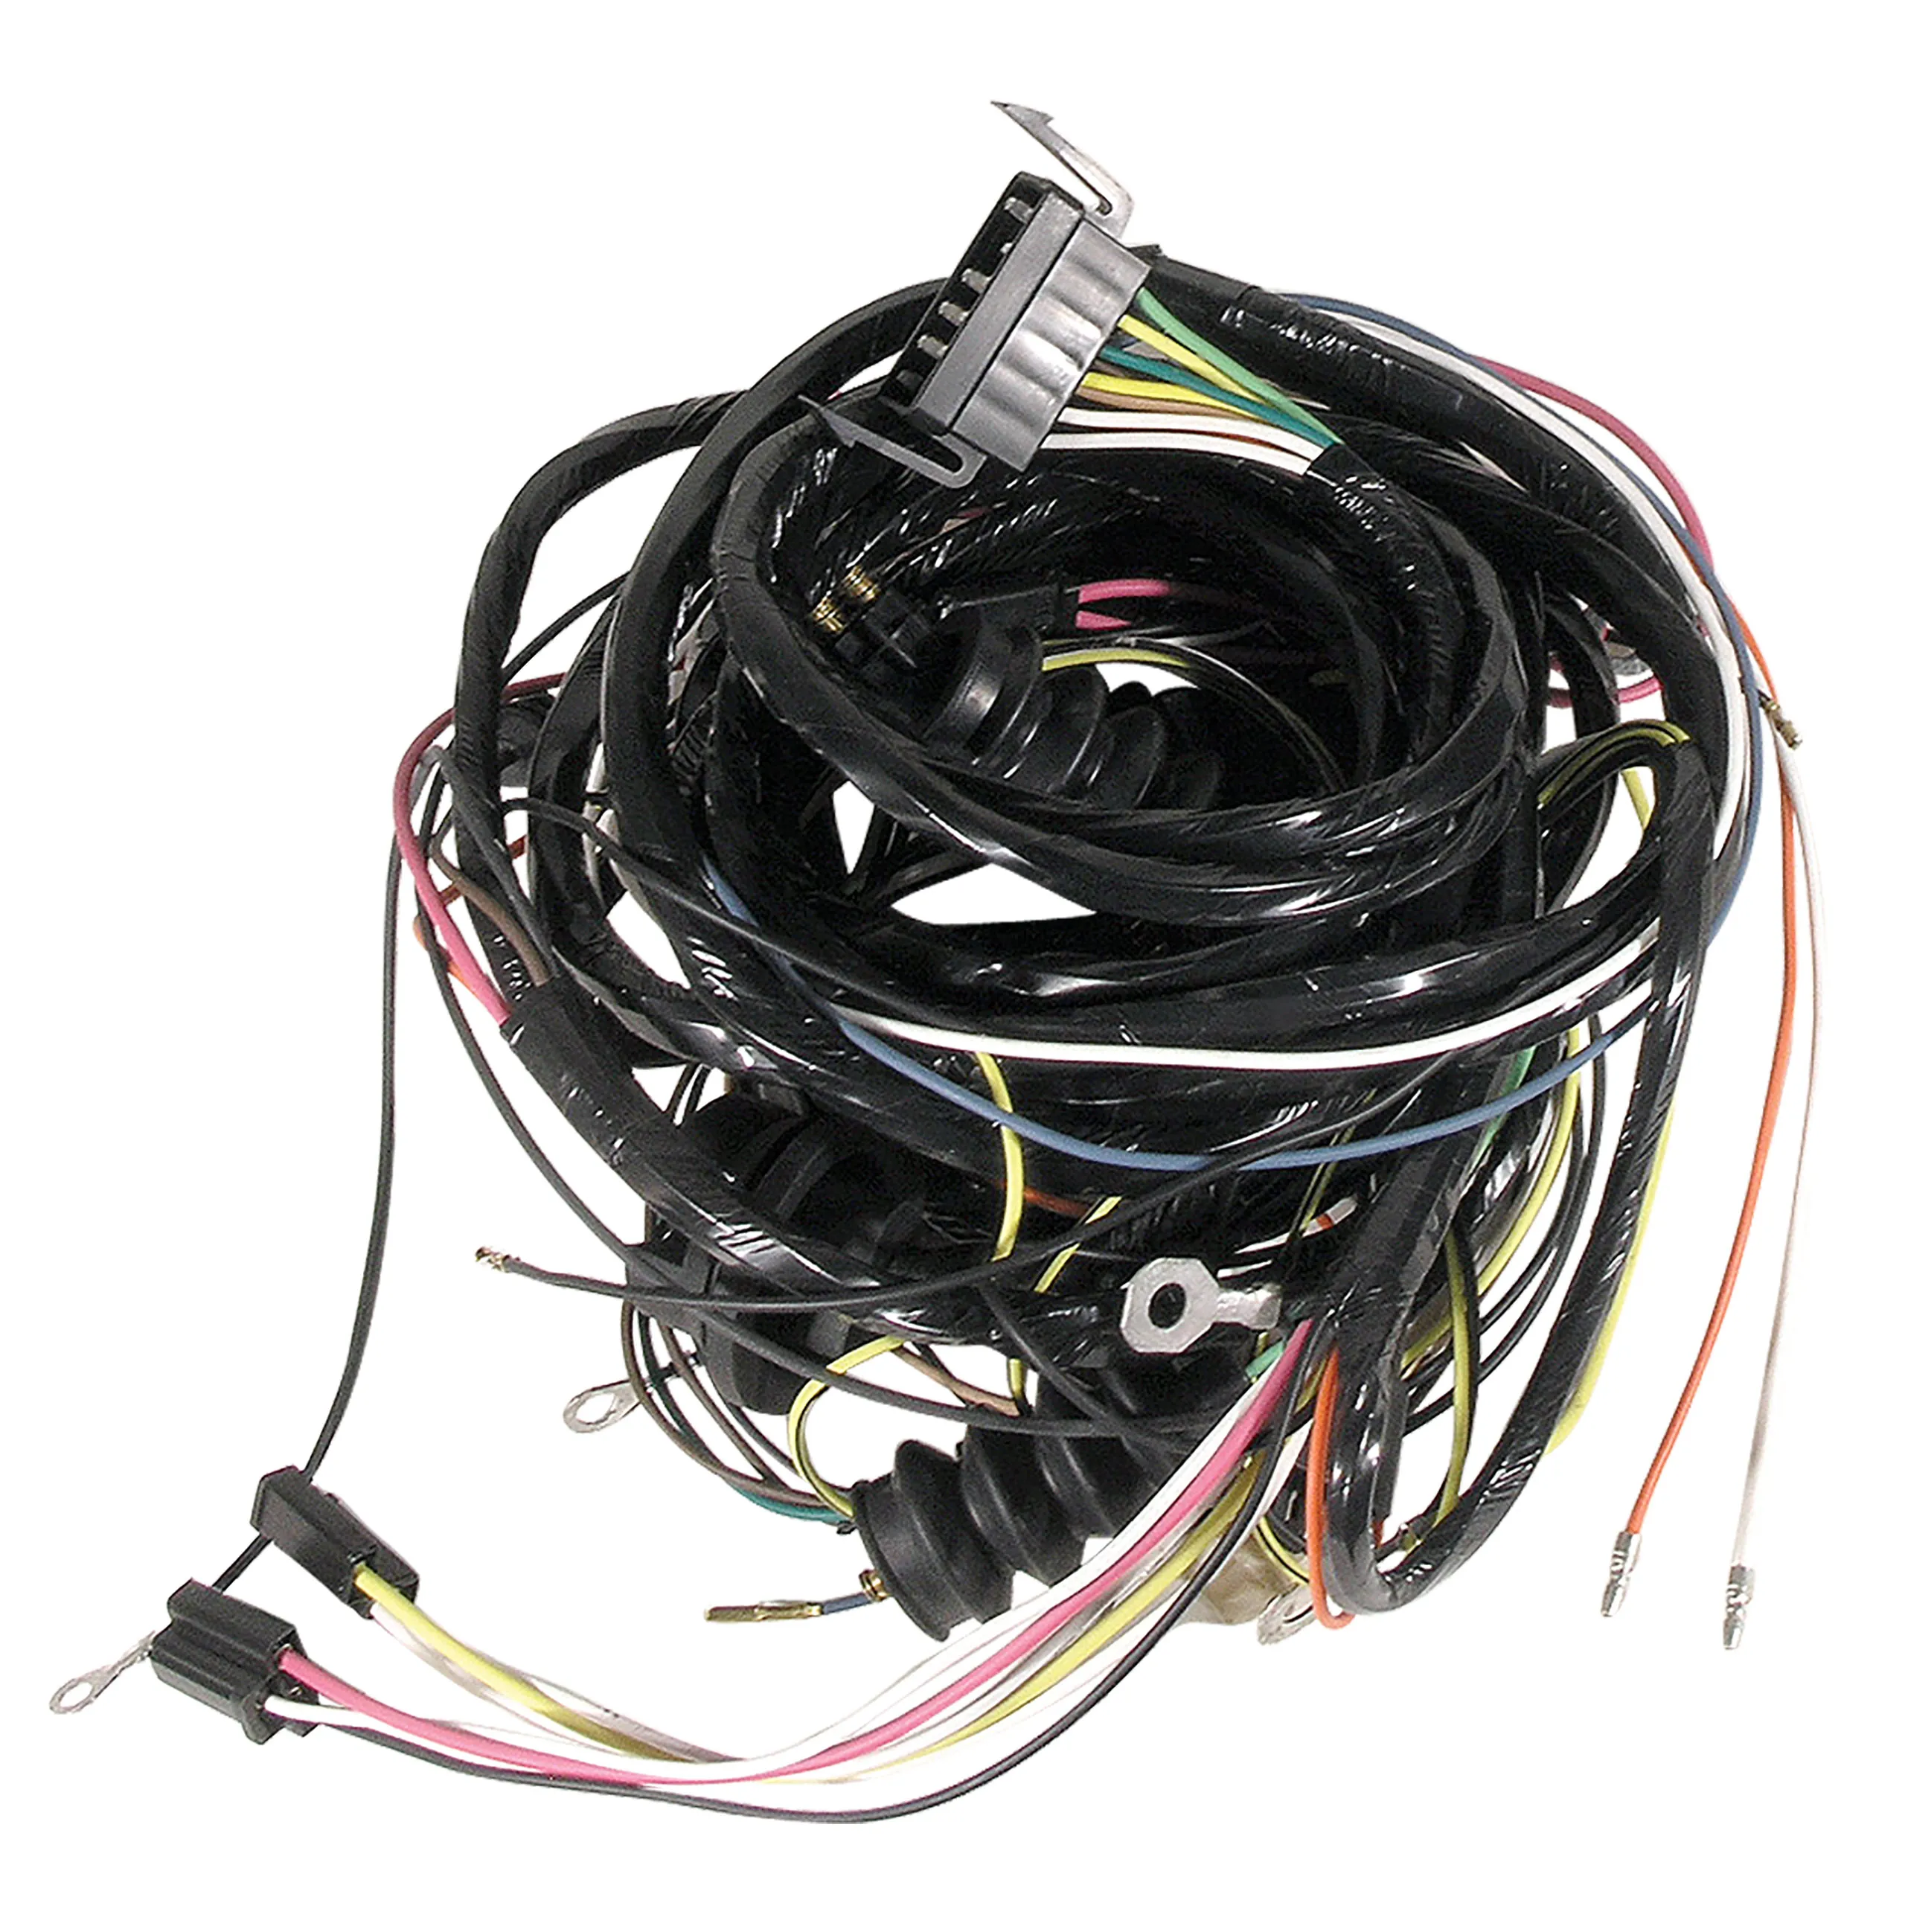 C3 1973 Chevrolet Corvette Harness. Rear All - Lectric Limited, Inc.